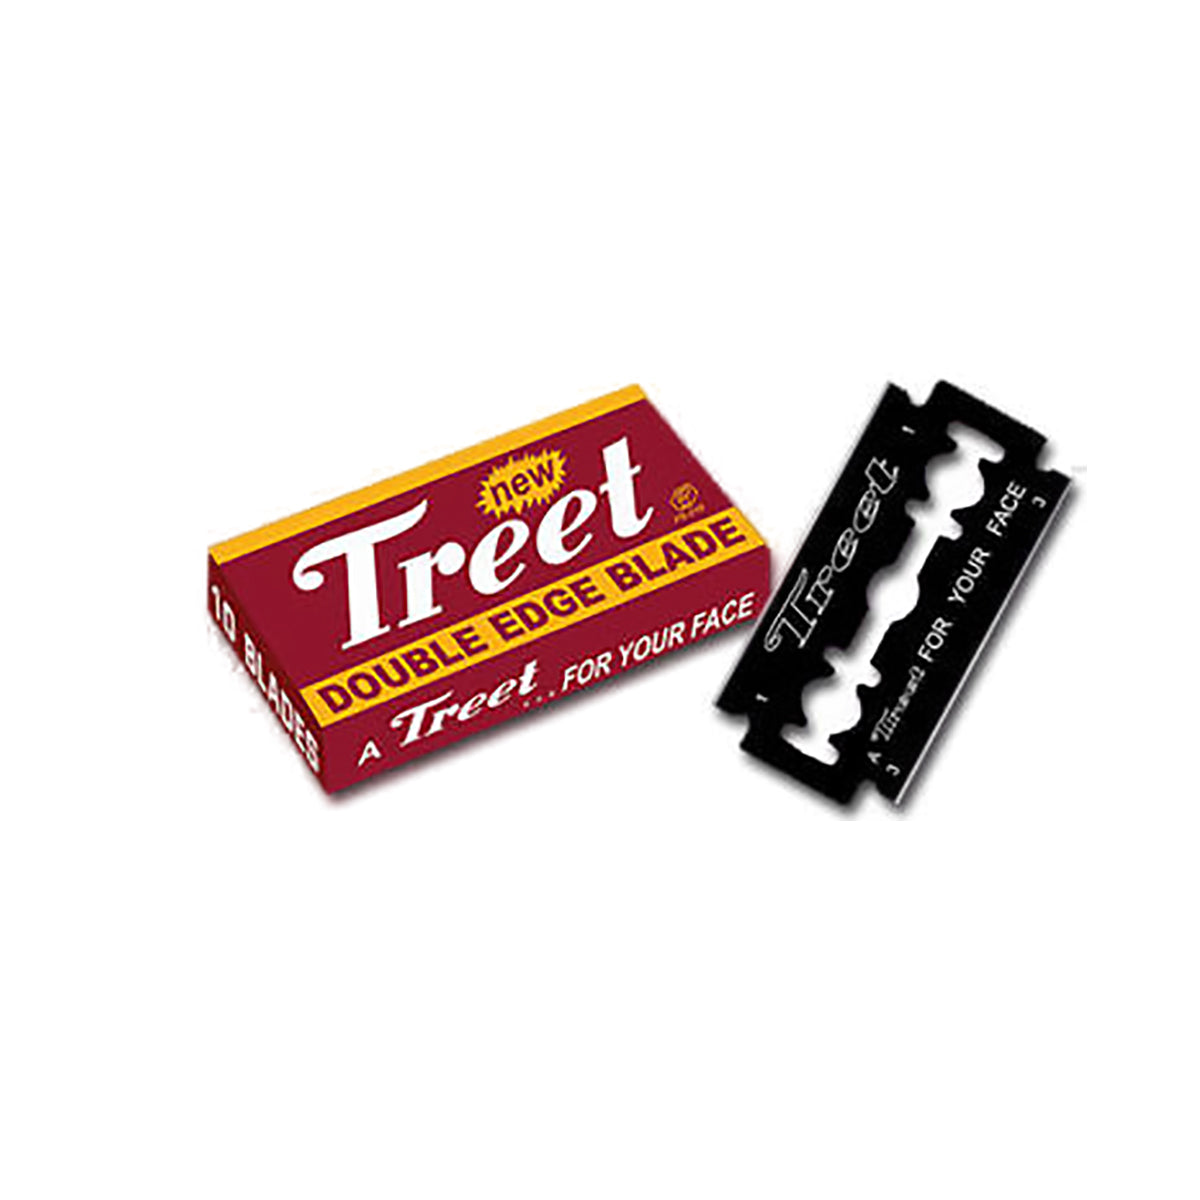 Treet Carbon Steel Double Edge Safety Razor Blade 5 Pack